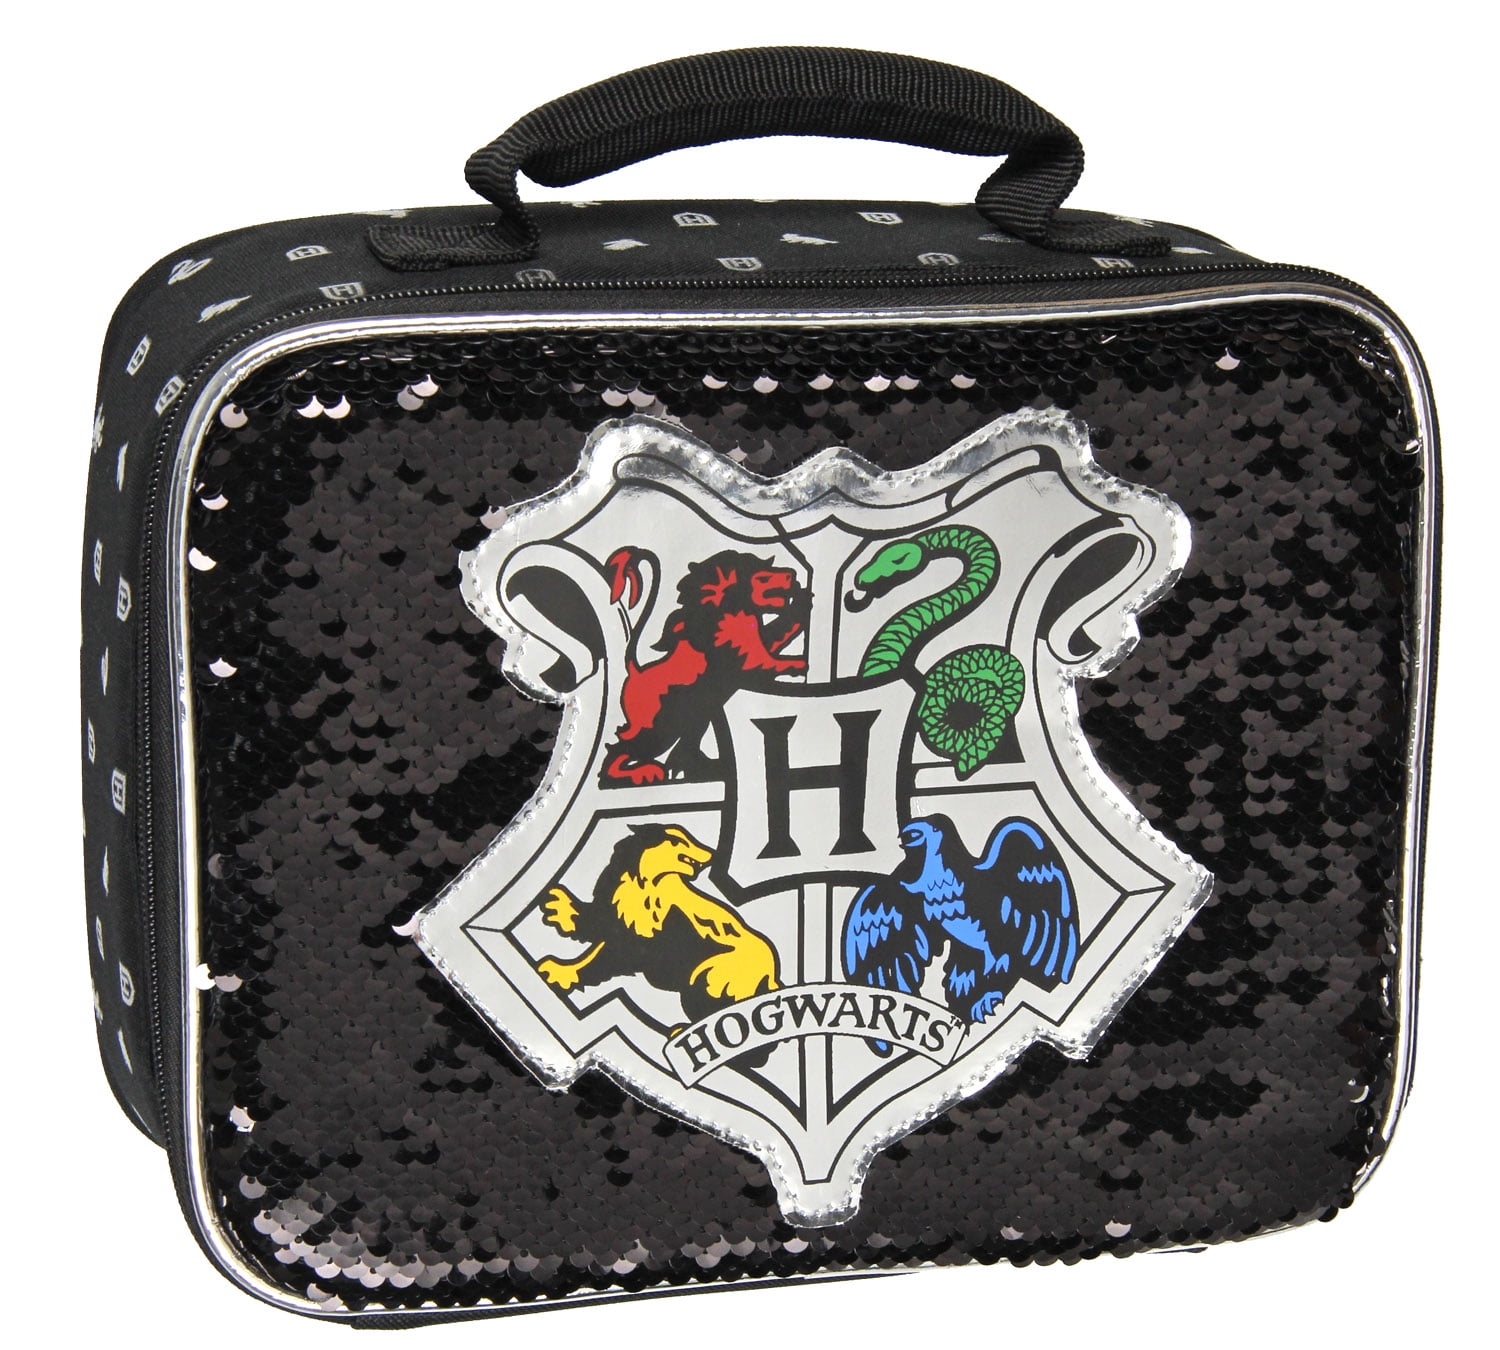 Harry Potter Lunch Box Packed Lunch Bag For Hogwarts Fans Kids Children Adults 